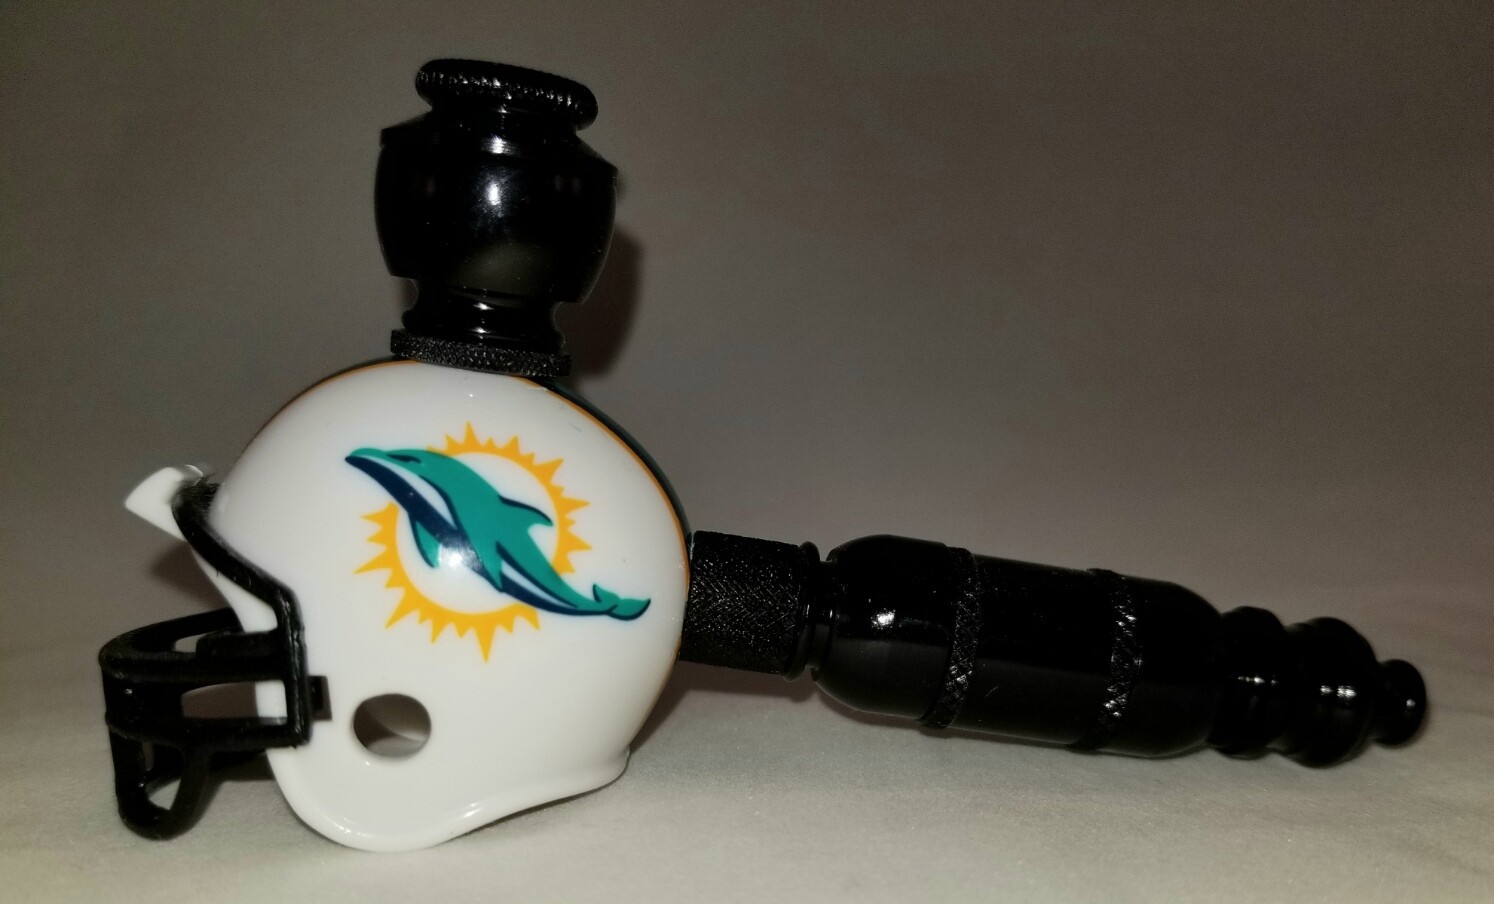 MIAMI DOLPHINS " BAD ASS" NFL FOOTBALL HELMET SMOKING PIPE Small Straight/Black Anodized